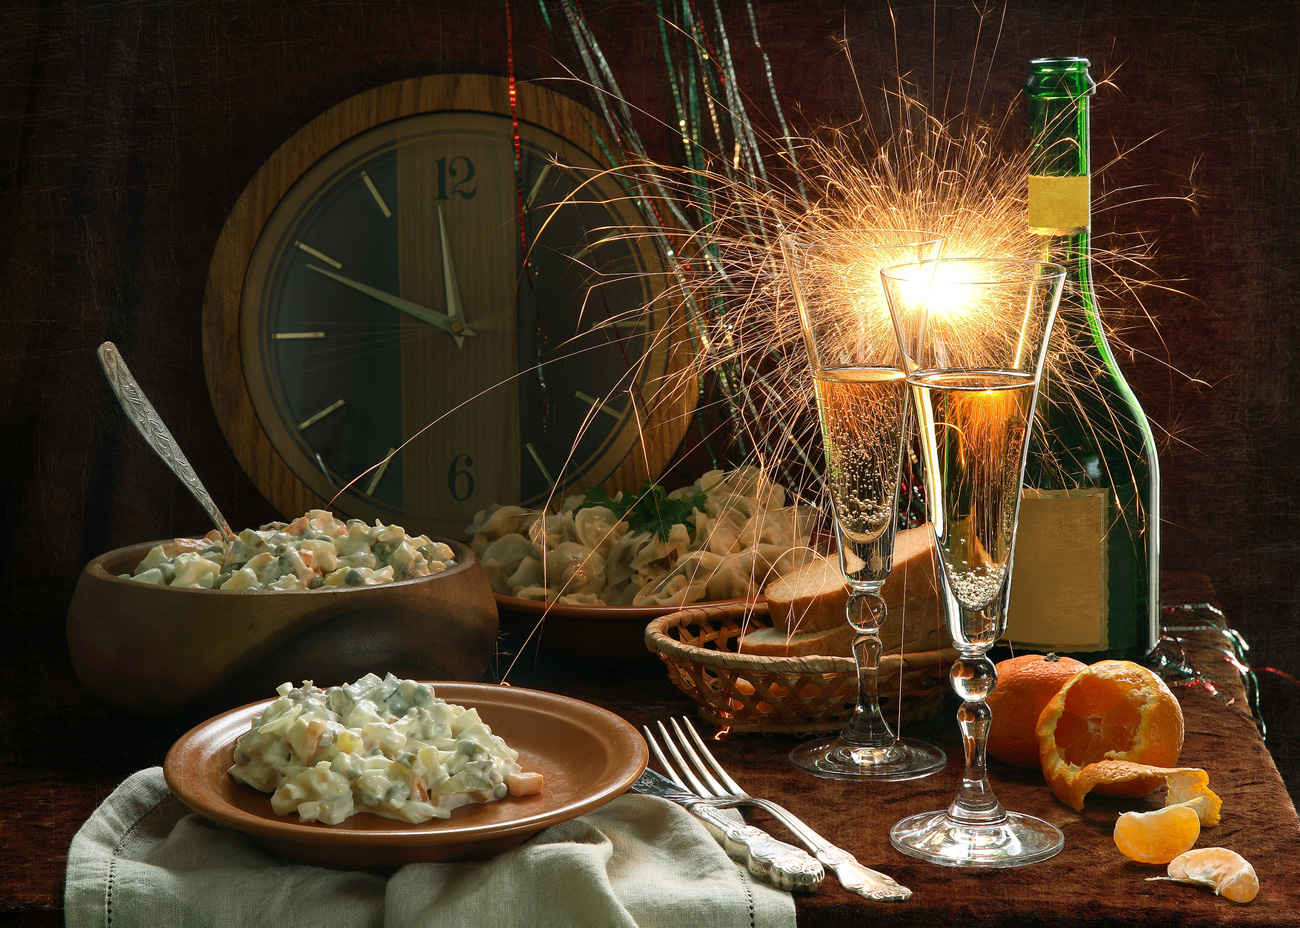 Olivier Salad Index: Russians prepare to shell out for New Year